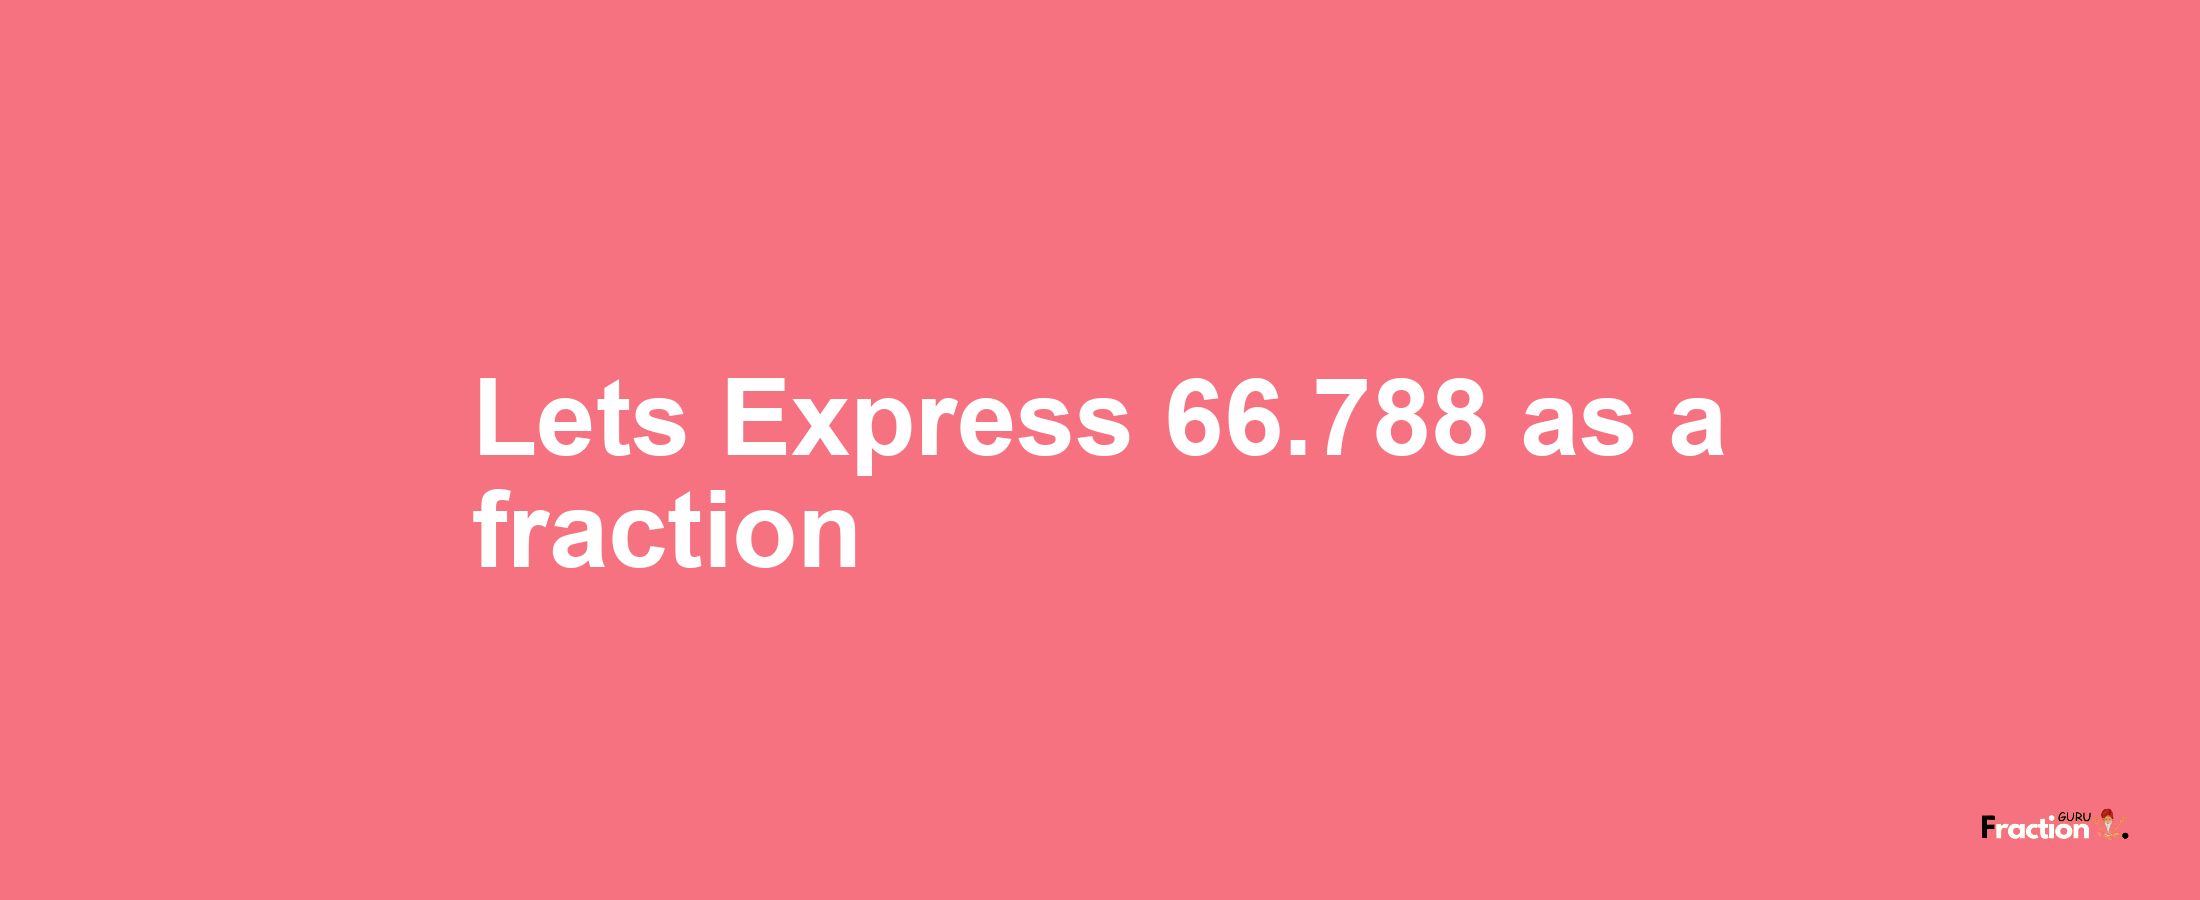 Lets Express 66.788 as afraction